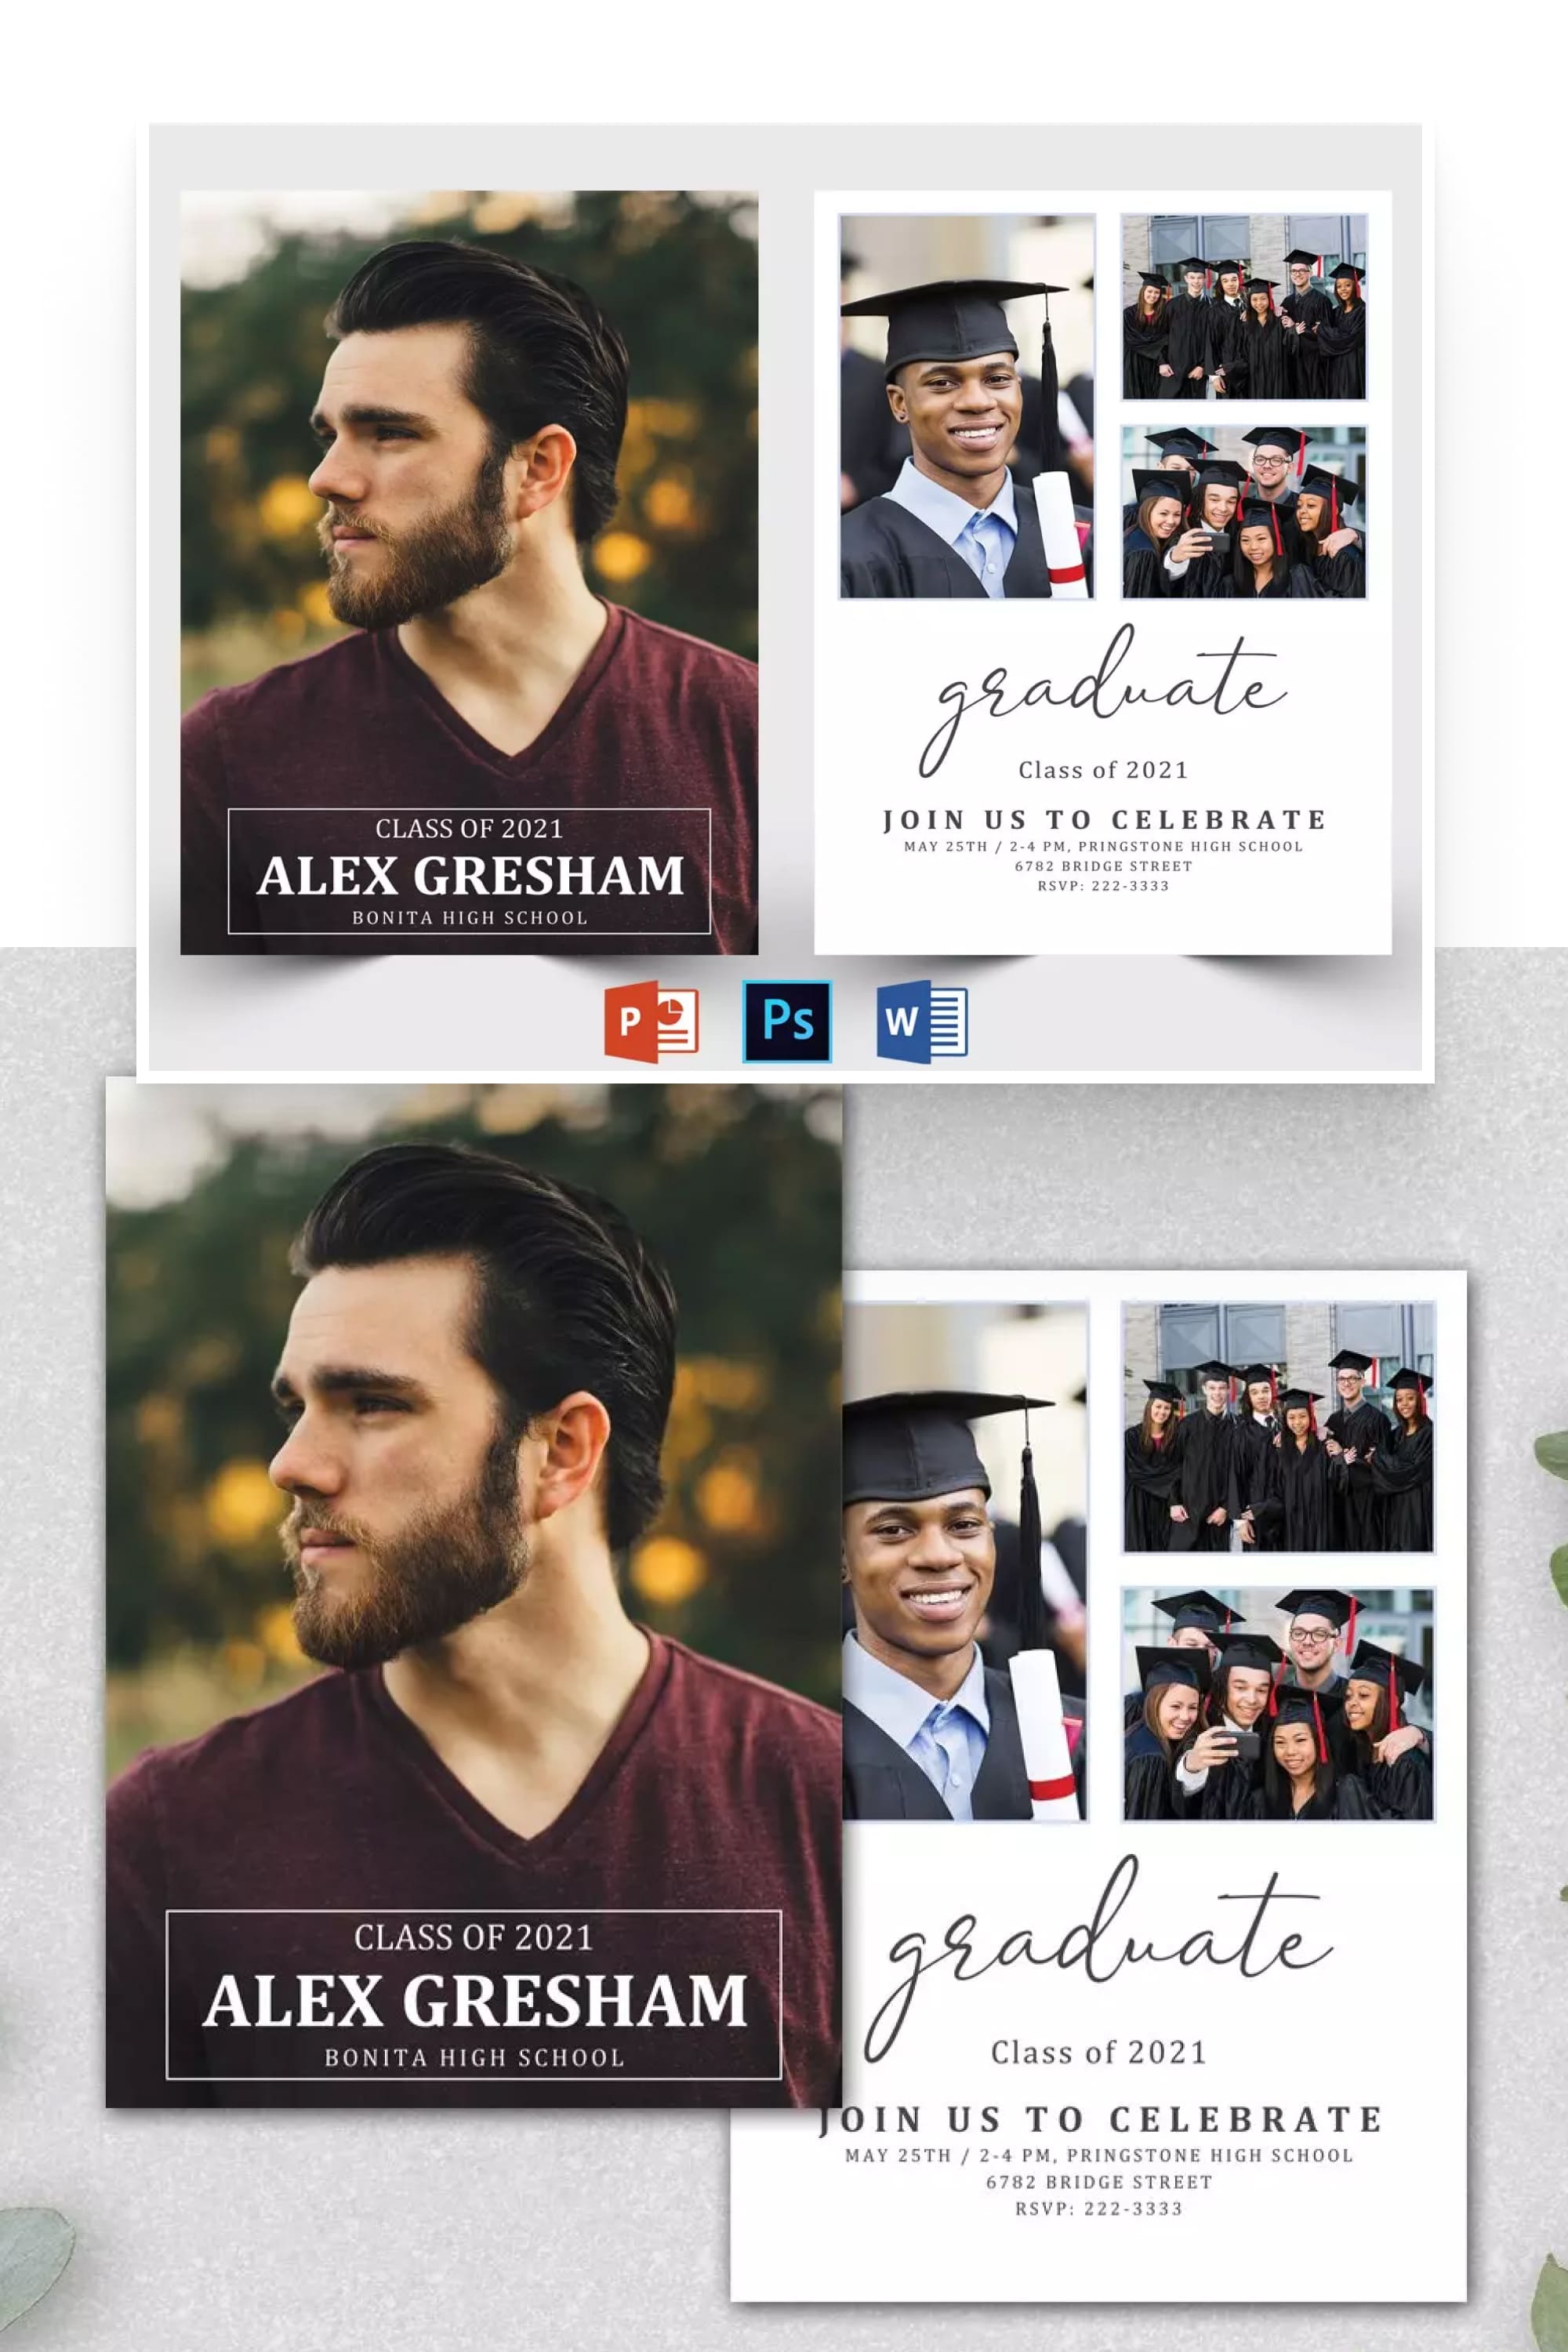 A collage of graduation invitation images with photos of a group of students and one student.